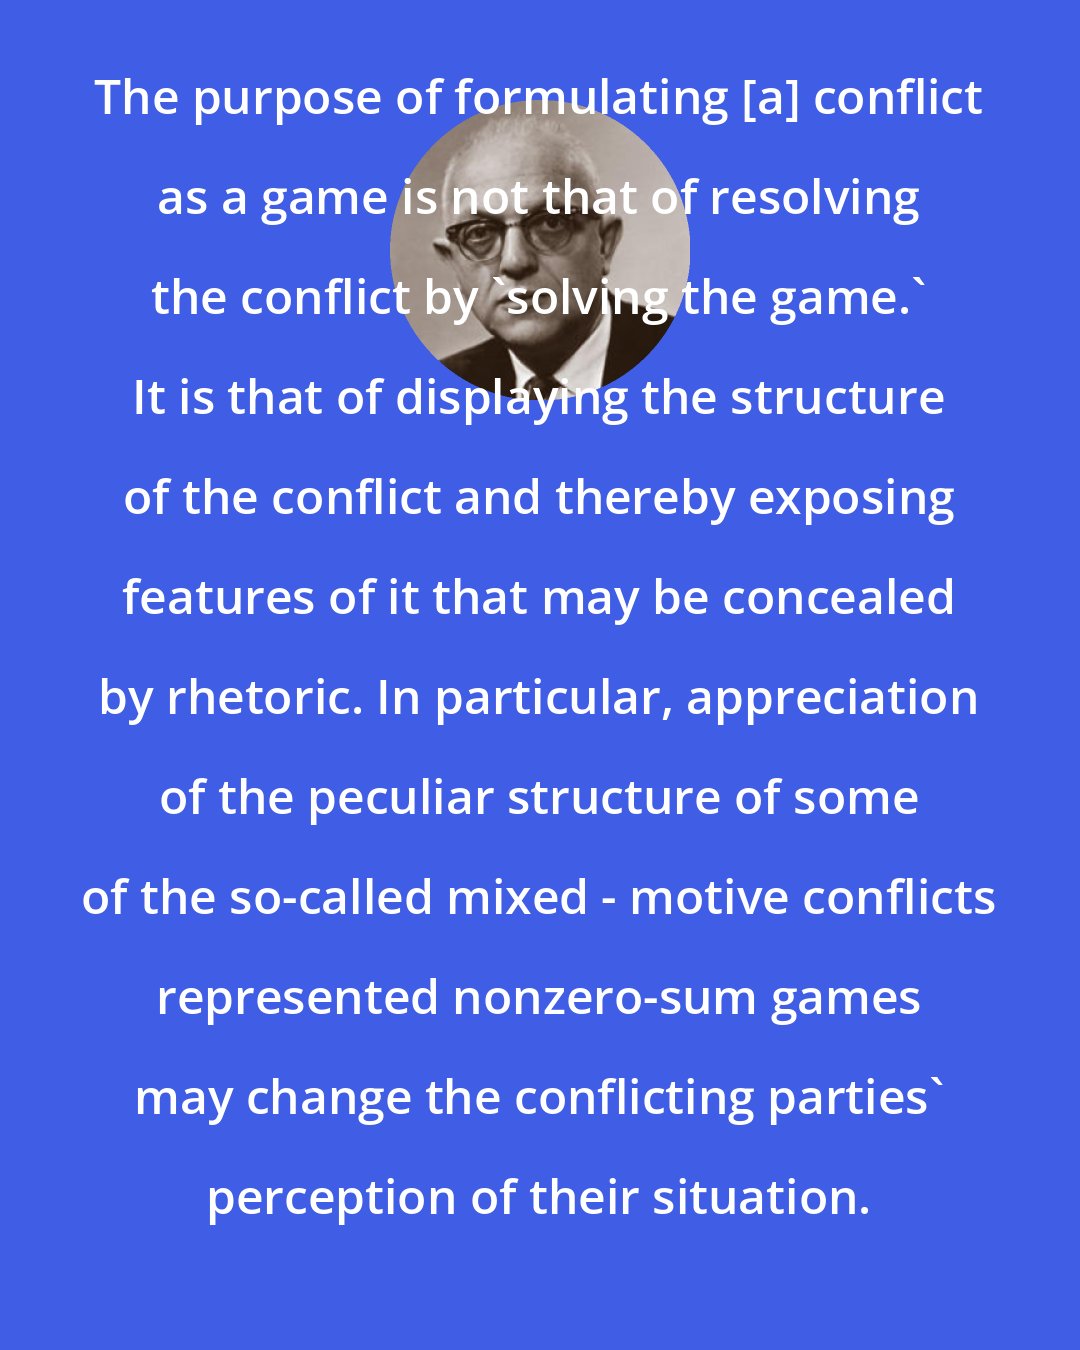 Anatol Rapoport: The purpose of formulating [a] conflict as a game is not that of resolving the conflict by 'solving the game.' It is that of displaying the structure of the conflict and thereby exposing features of it that may be concealed by rhetoric. In particular, appreciation of the peculiar structure of some of the so-called mixed - motive conflicts represented nonzero-sum games may change the conflicting parties' perception of their situation.